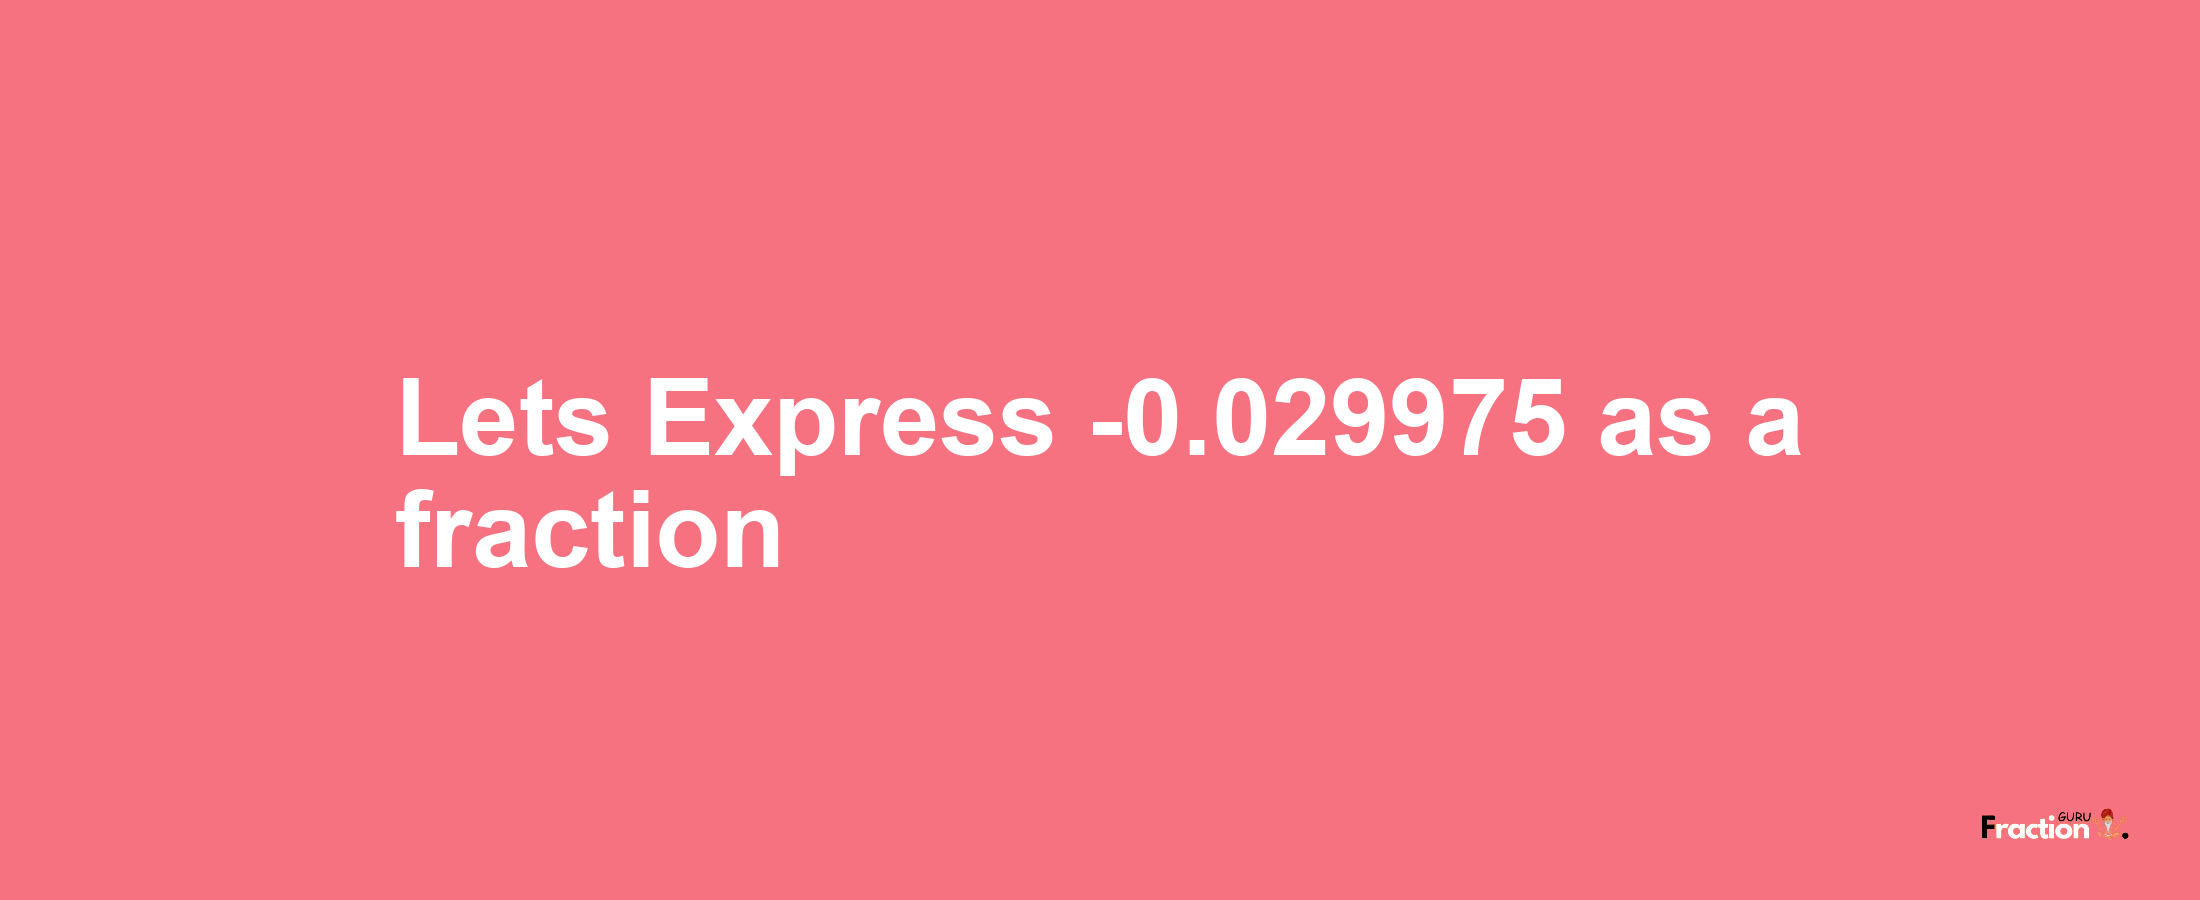 Lets Express -0.029975 as afraction